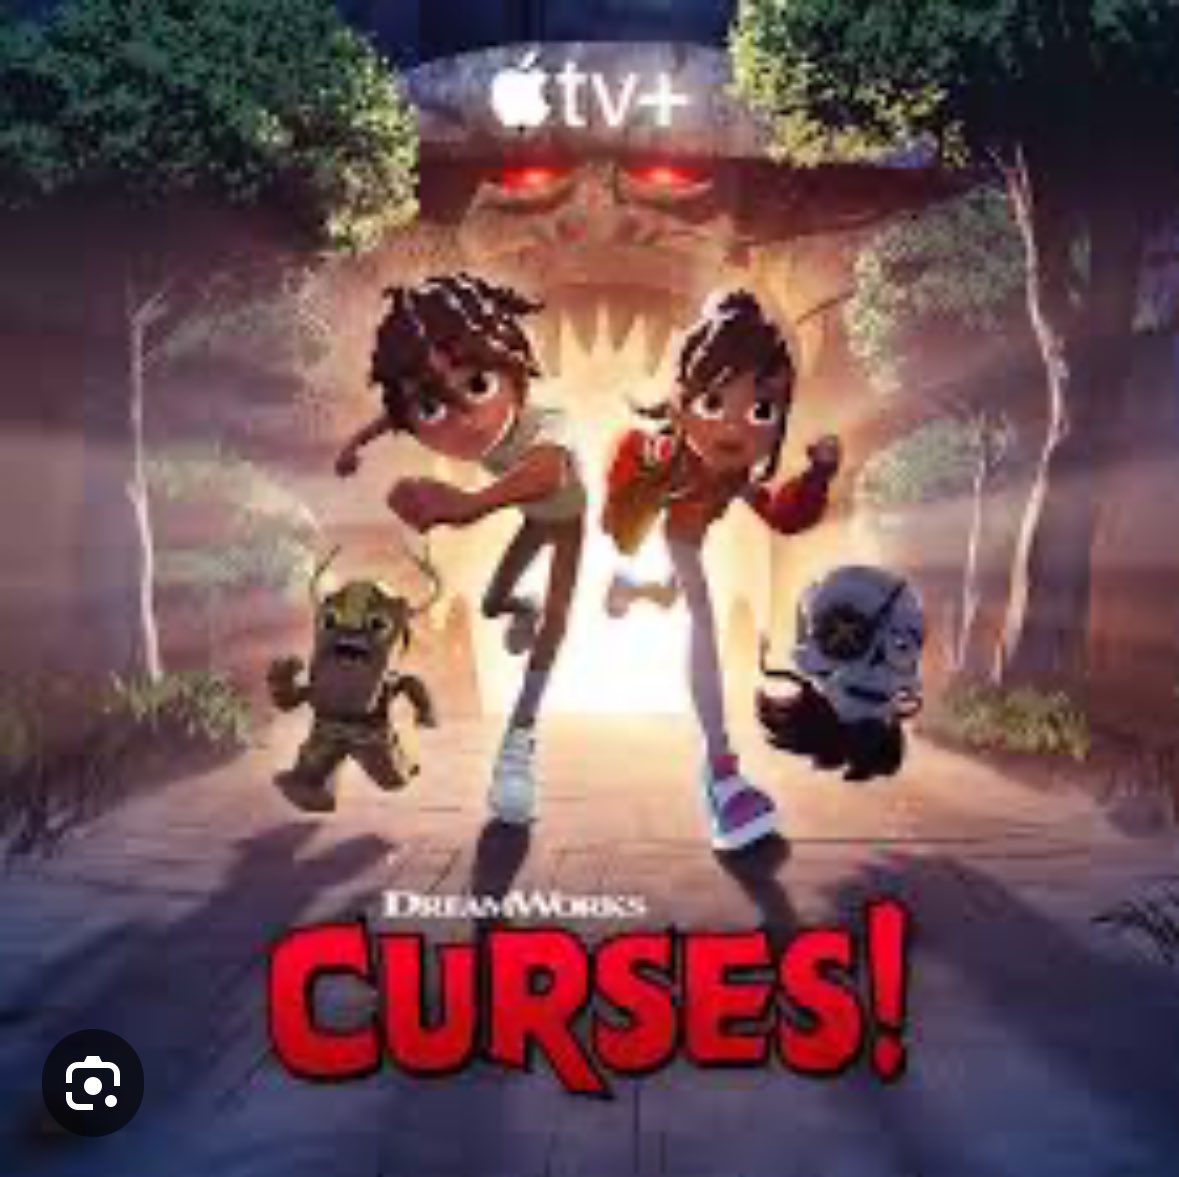 Cure that post-Halloween hangover with a hair-of-the-dog dose of Yours Truly voicing the villain in the superbly animated Dreamworks CURSES on AppleTV+ Or see me in NATTY KNOCKS with my Fear Clinic pal Danielle Harris or check out the documentary HOLLYWOOD DREAMS AND NIGHTMARES